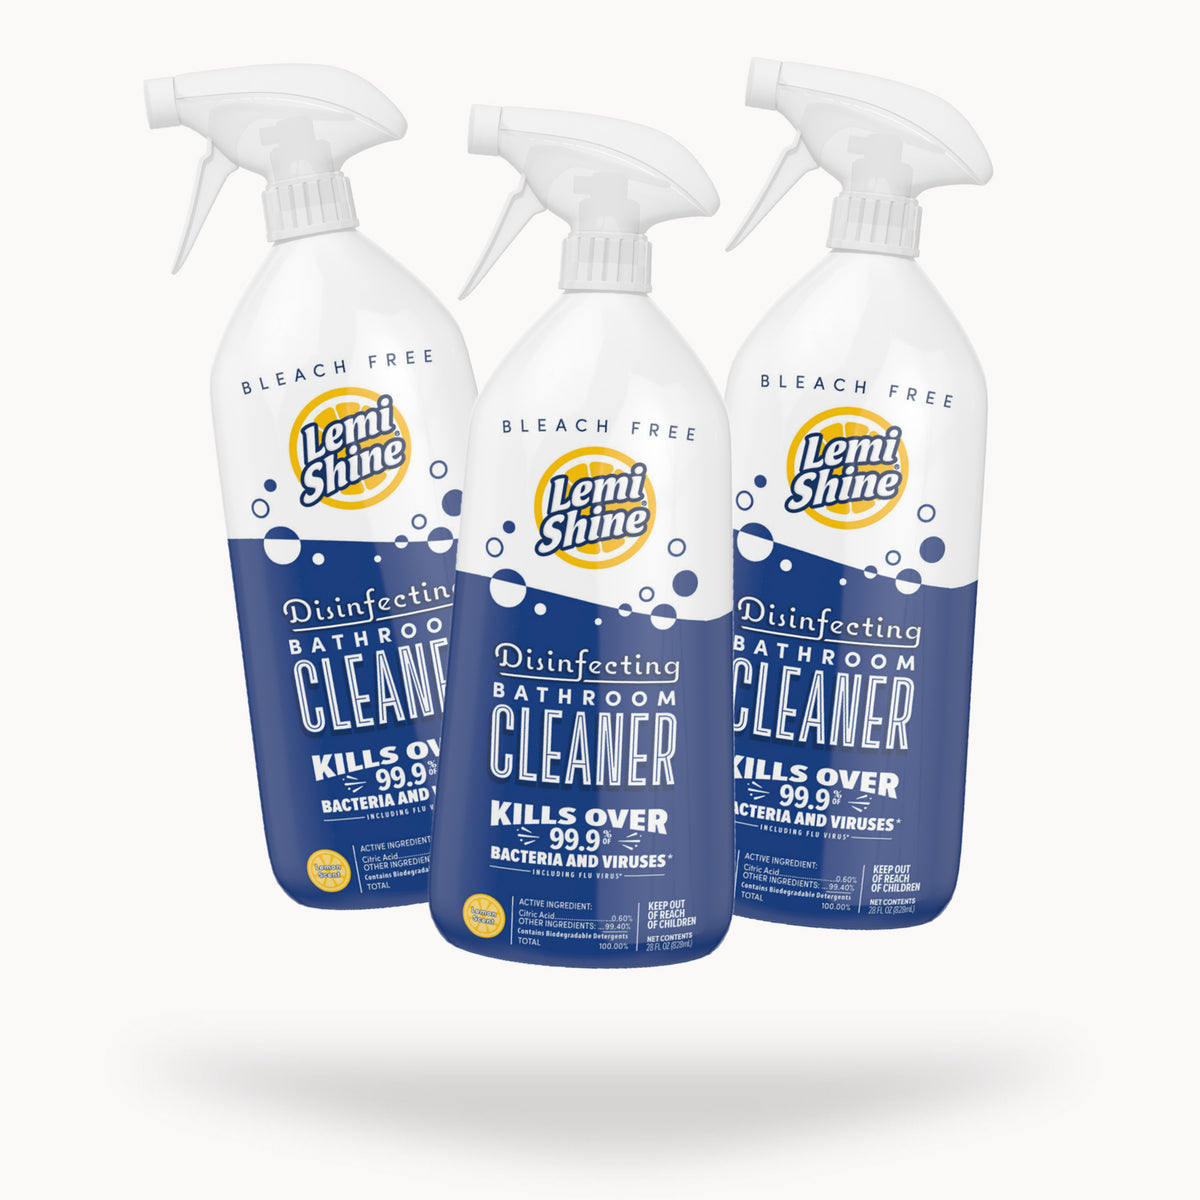 Clorox Fresh Toilet Bowl Cleaner with Bleach - Shop Toilet Bowl Cleaners at  H-E-B